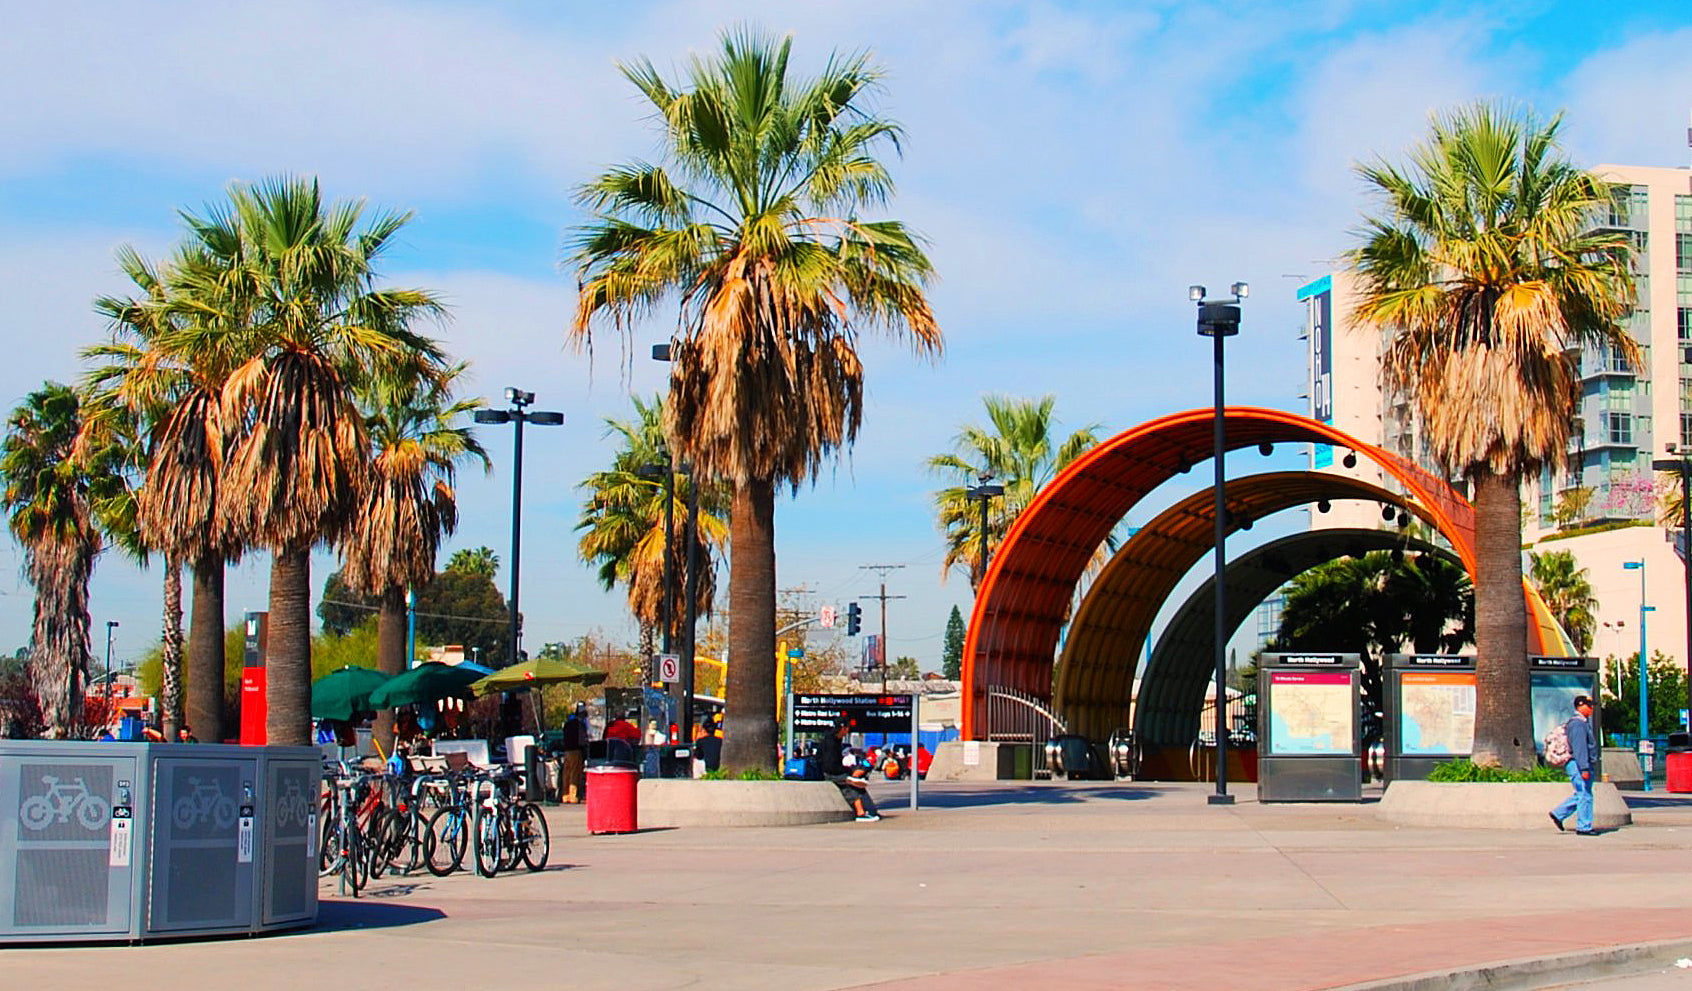 How To Explore LA North Hollywood and Studio City